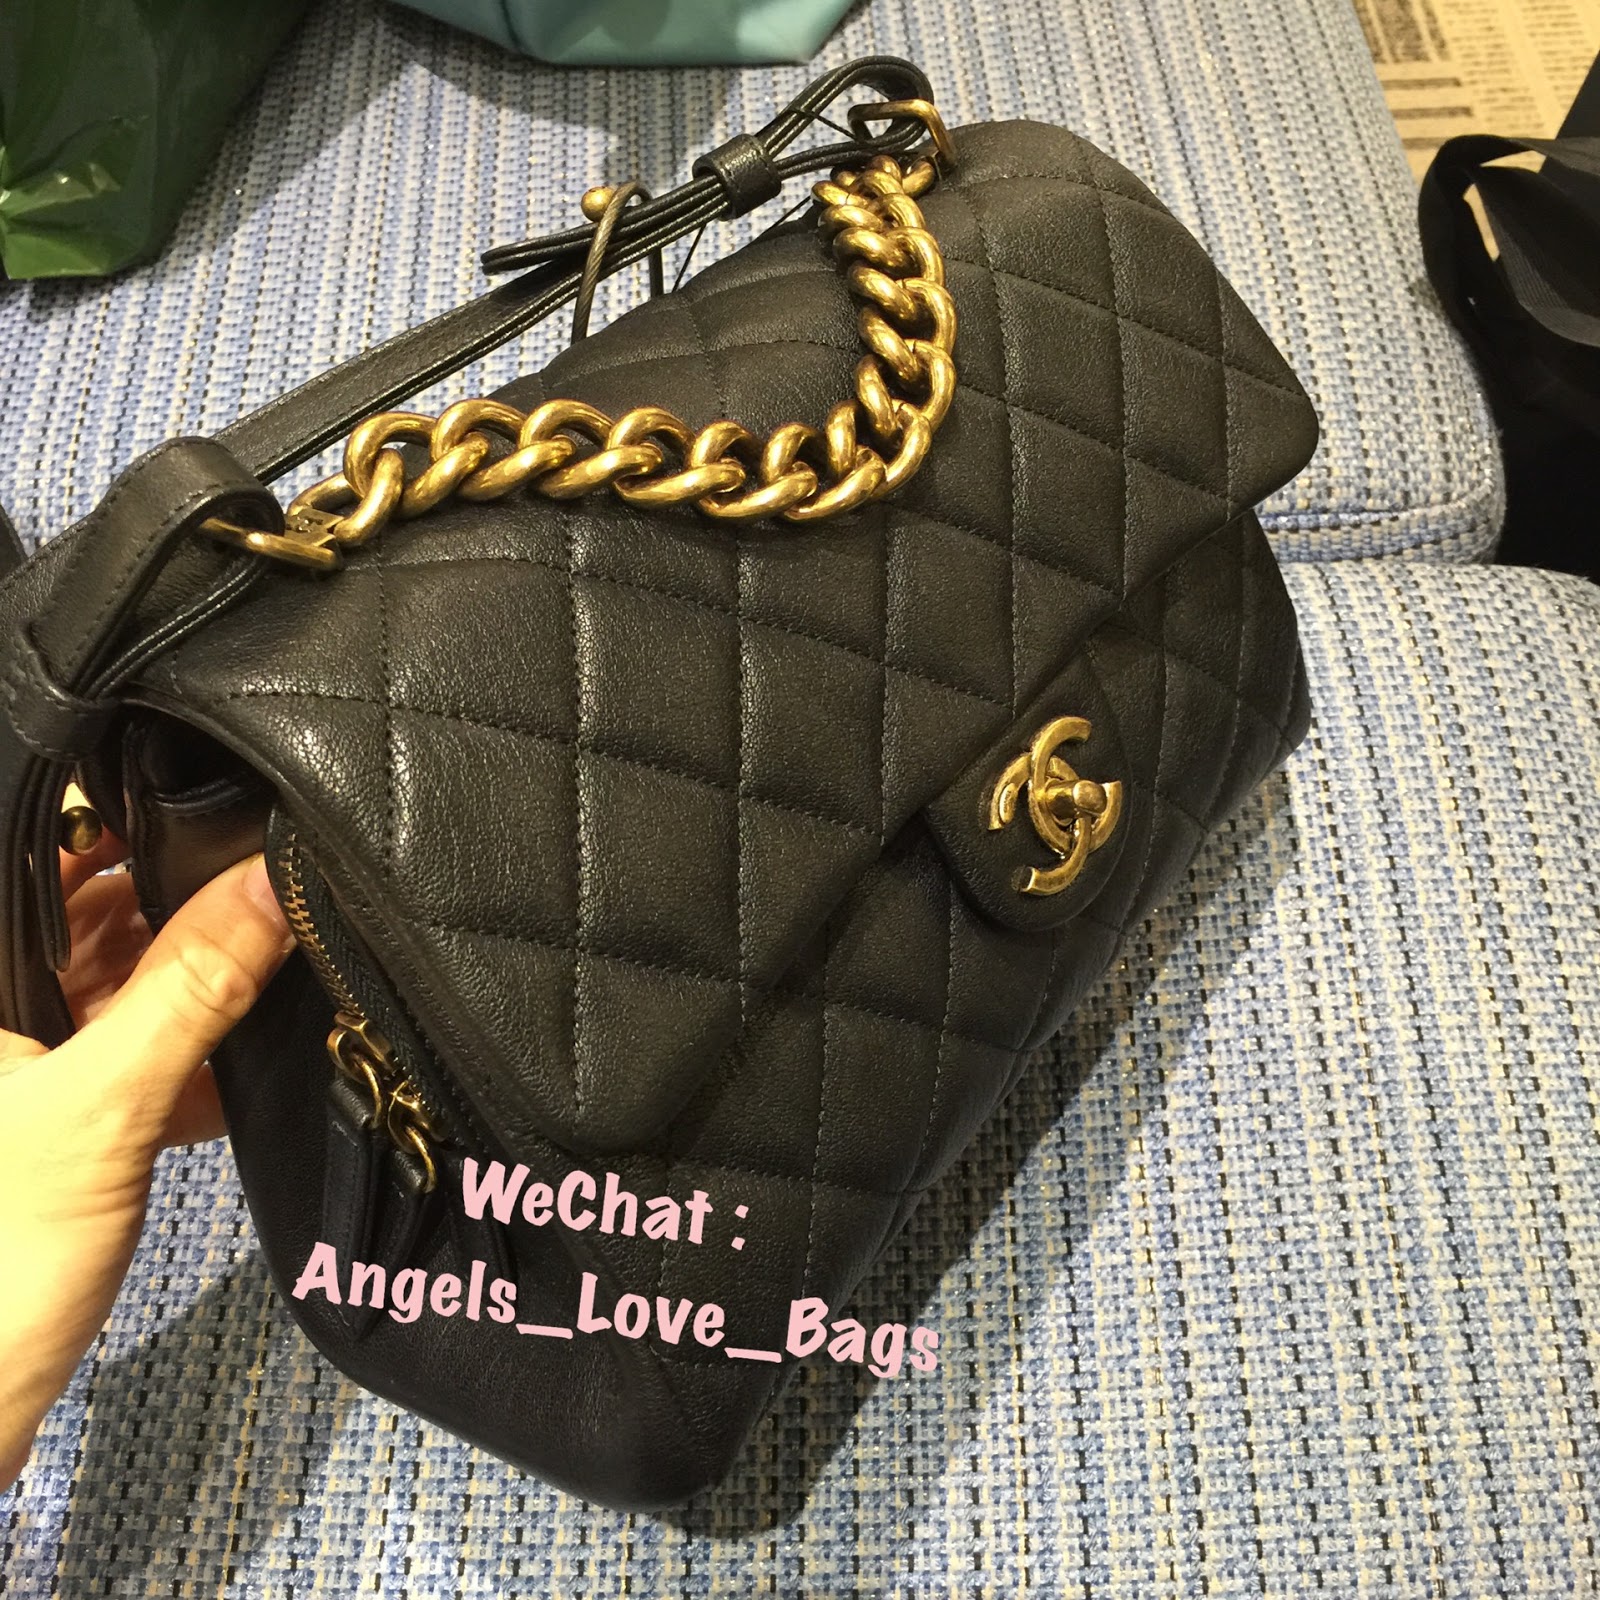 Angels Love Bags - The Fashion Buyer: CHANEL Quilted Flap Crossbody Bag with Short Chain Top Handle